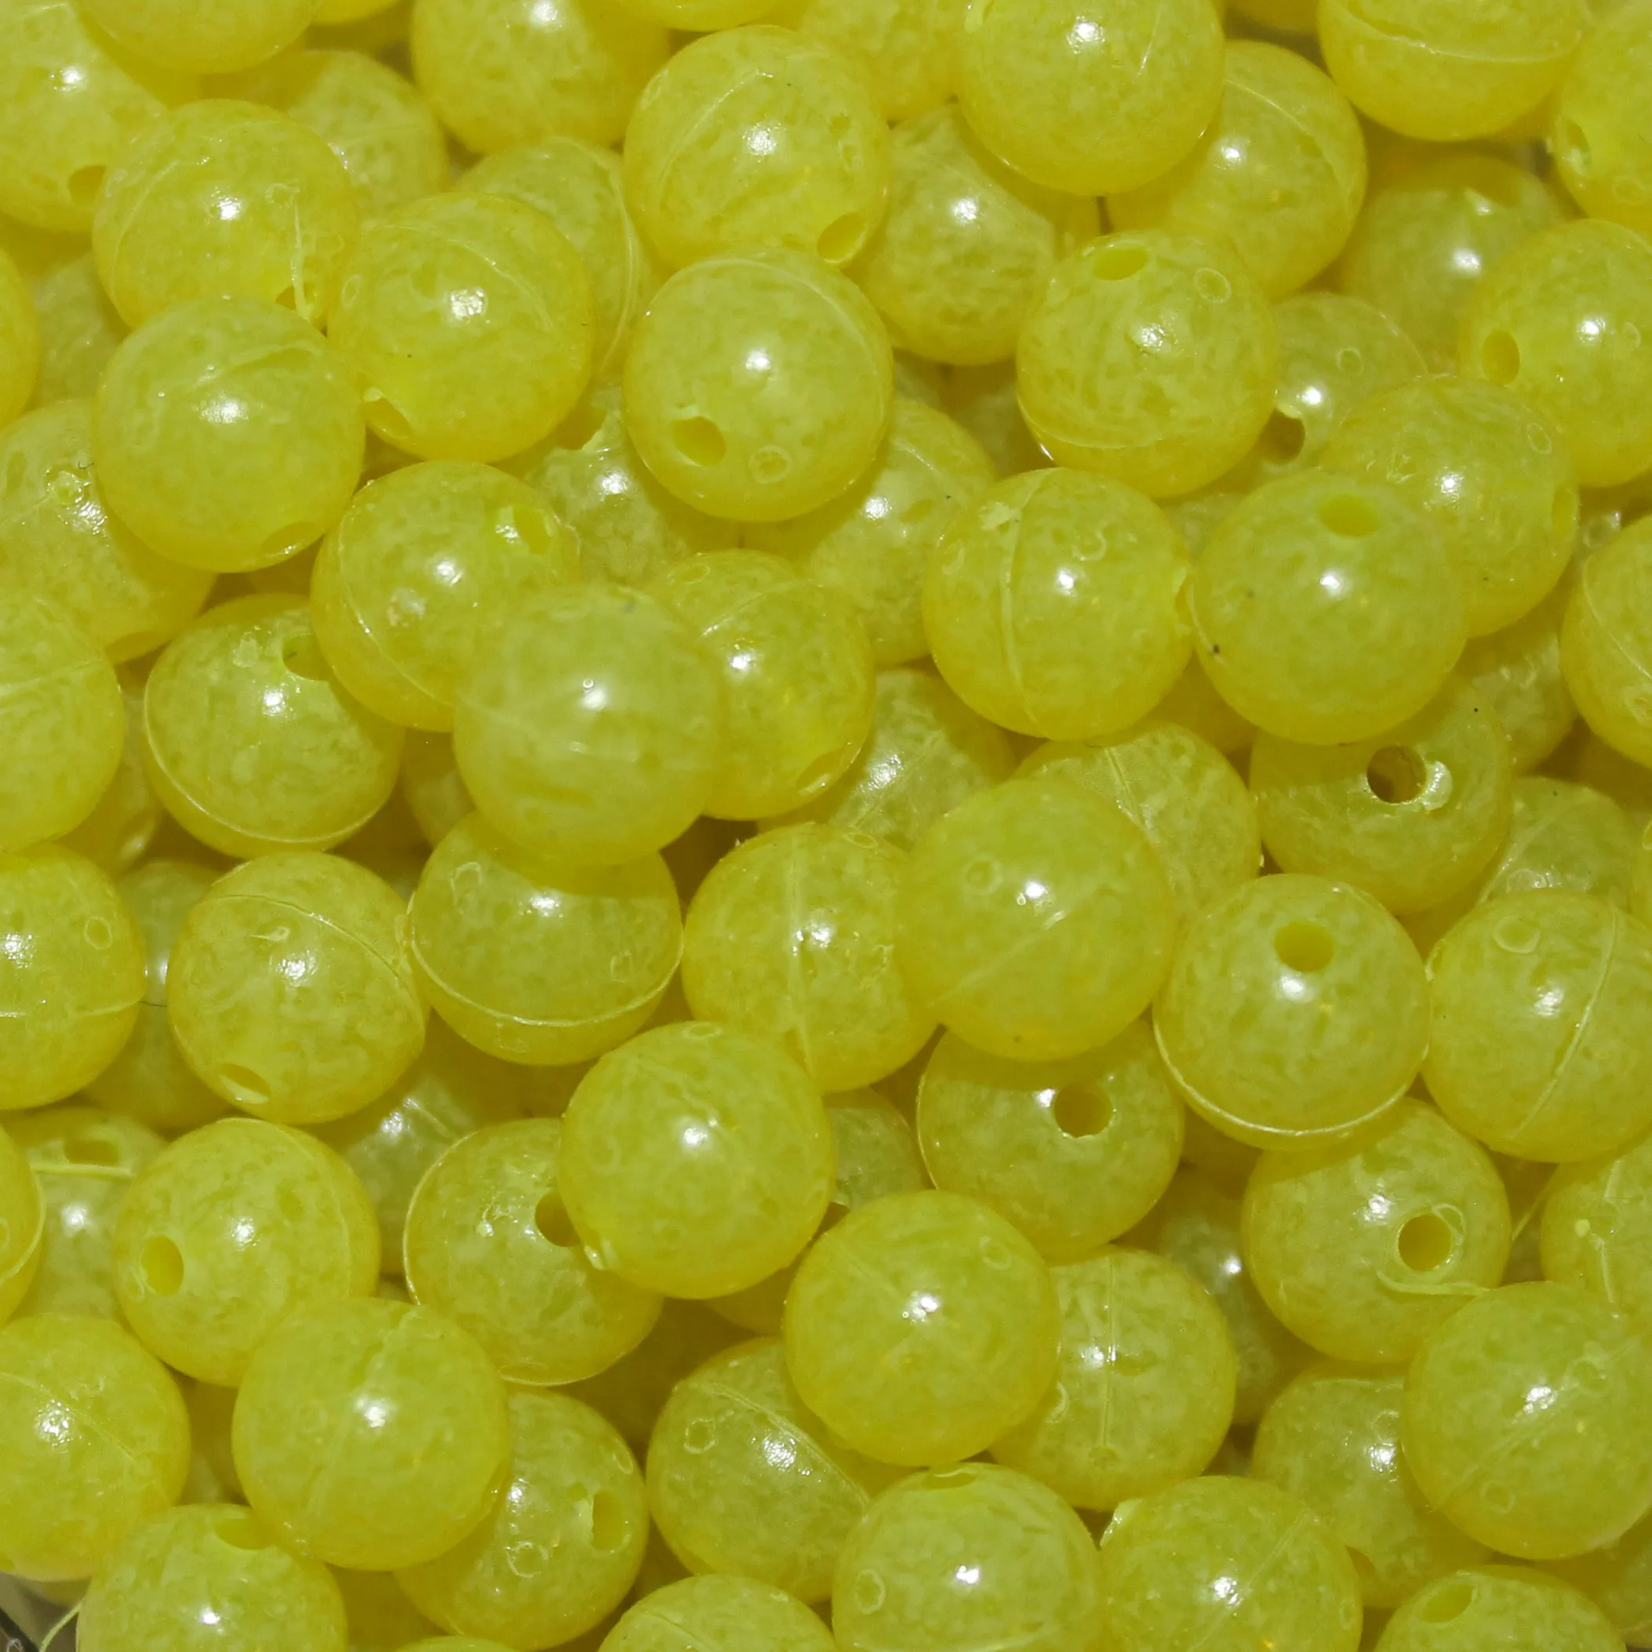 TroutBeads.com, Inc. TROUT BEADS- MOTTLED BEADS